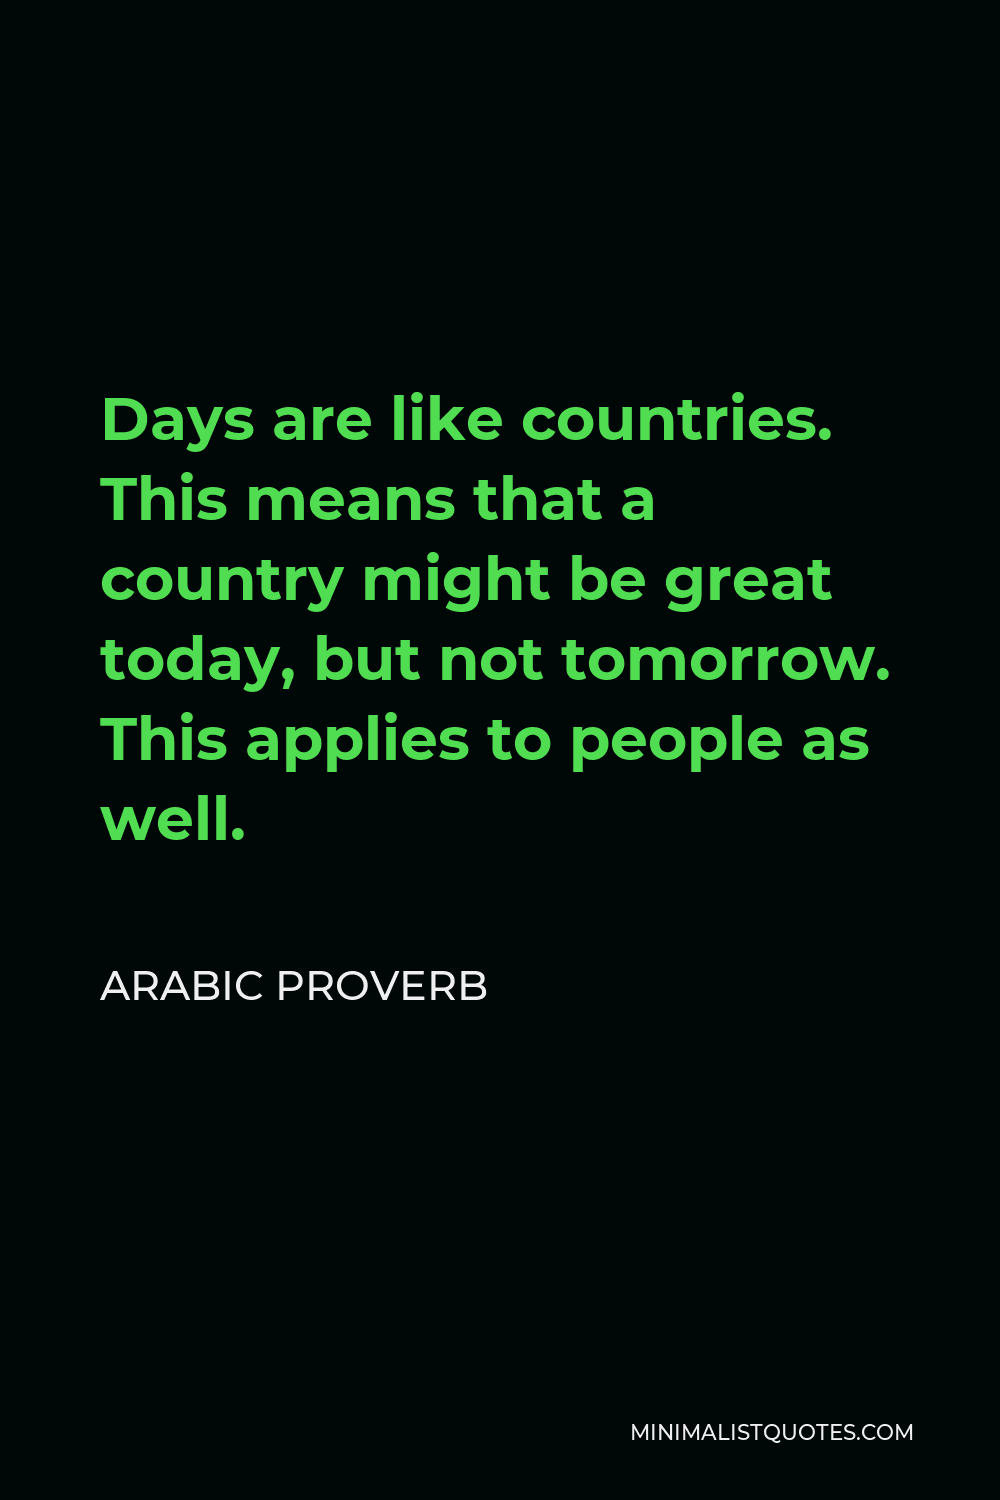 Arabic Proverb Quote - Days are like countries. This means that a country might be great today, but not tomorrow. This applies to people as well.